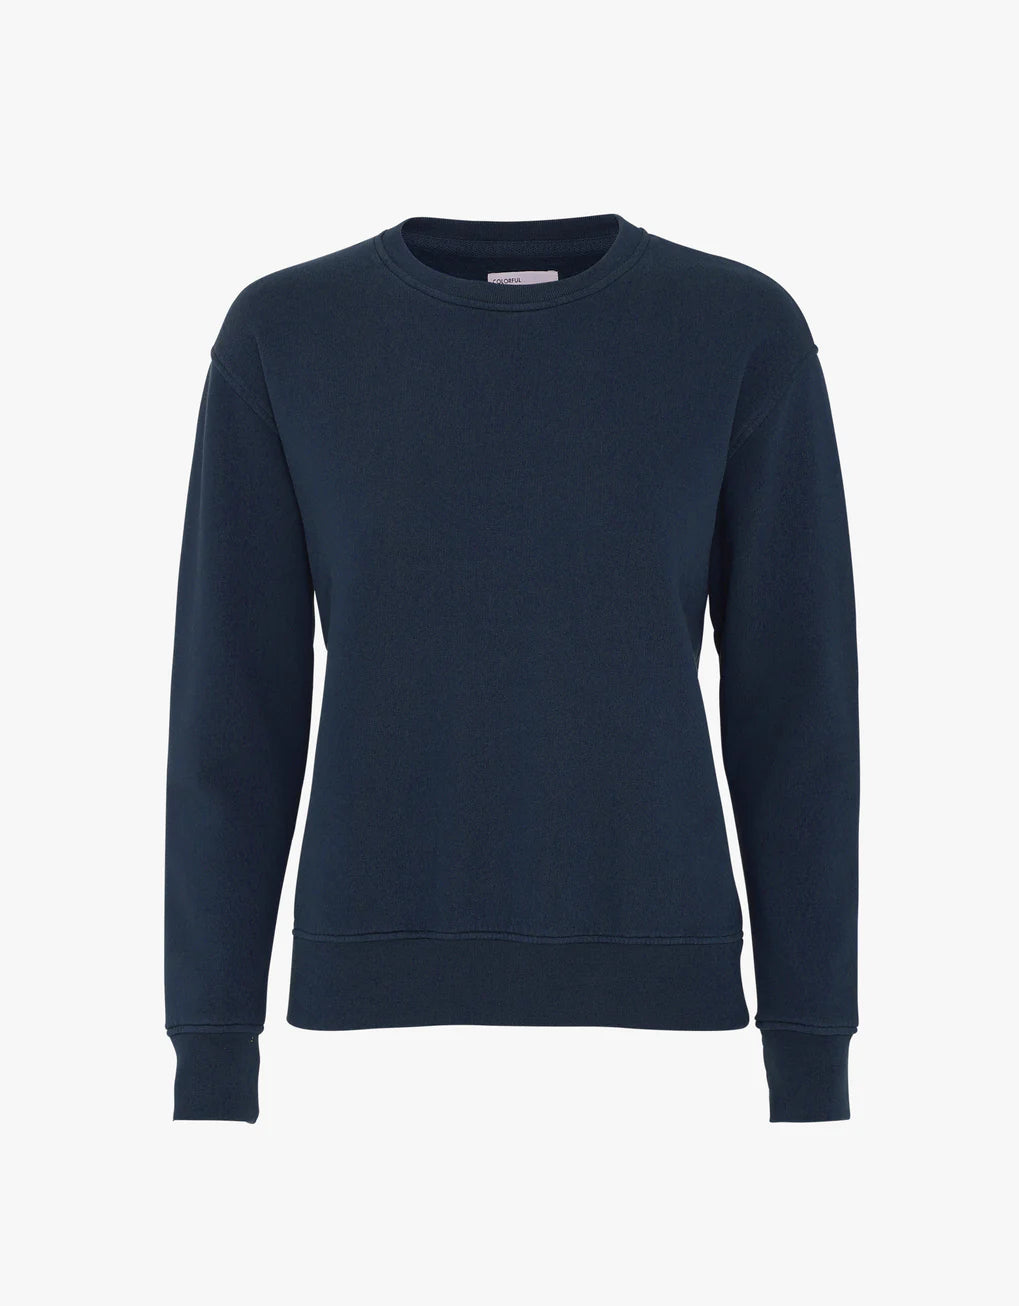 A Classic Organic Crew sweatshirt in dark blue, made from organic cotton by Colorful Standard.